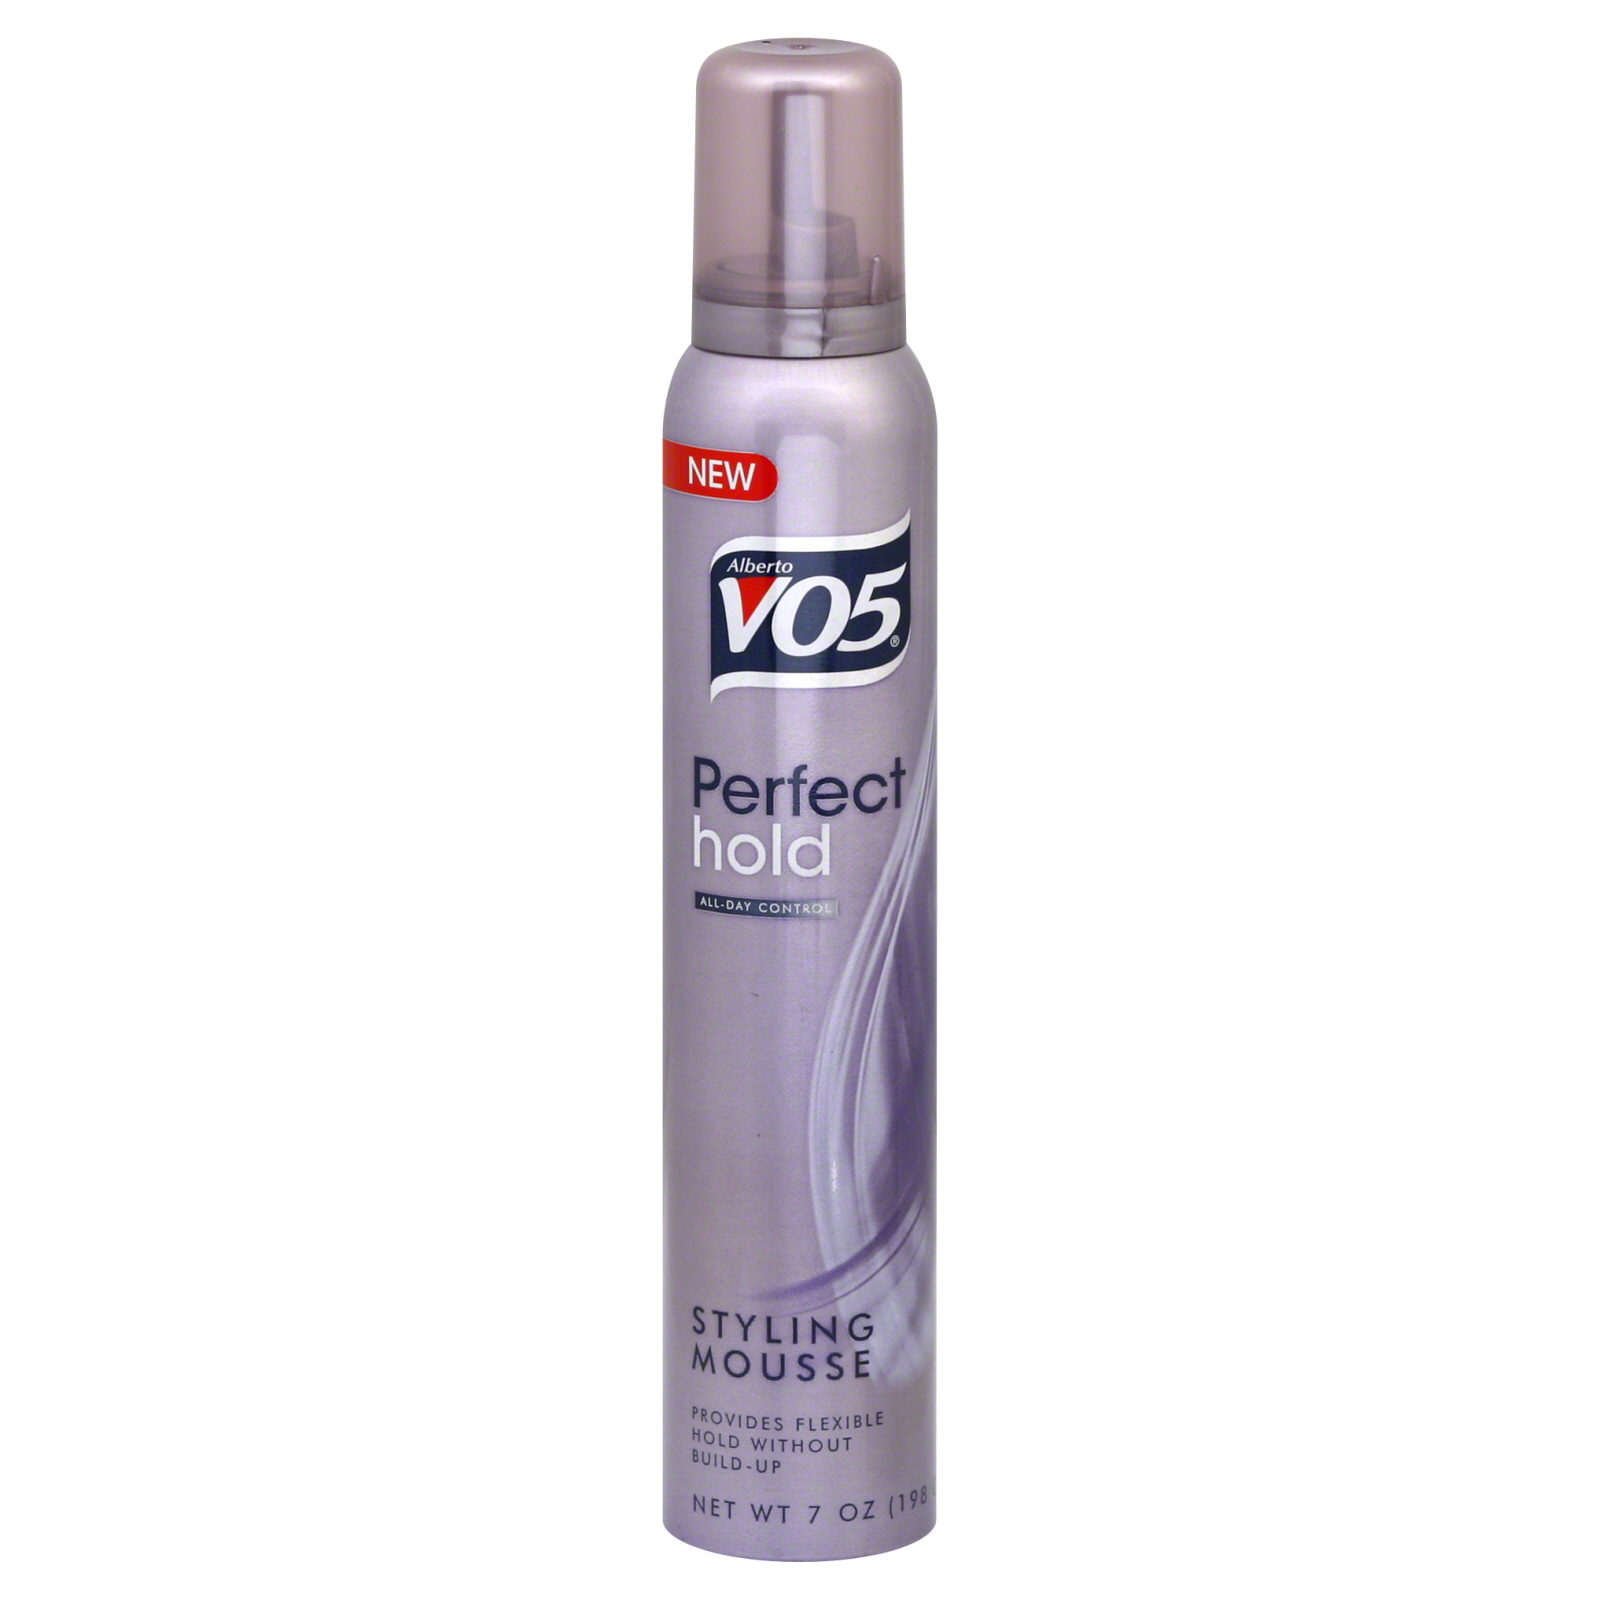 VO5 Perfect Hold Styling Mousse 7 oz (198 g)